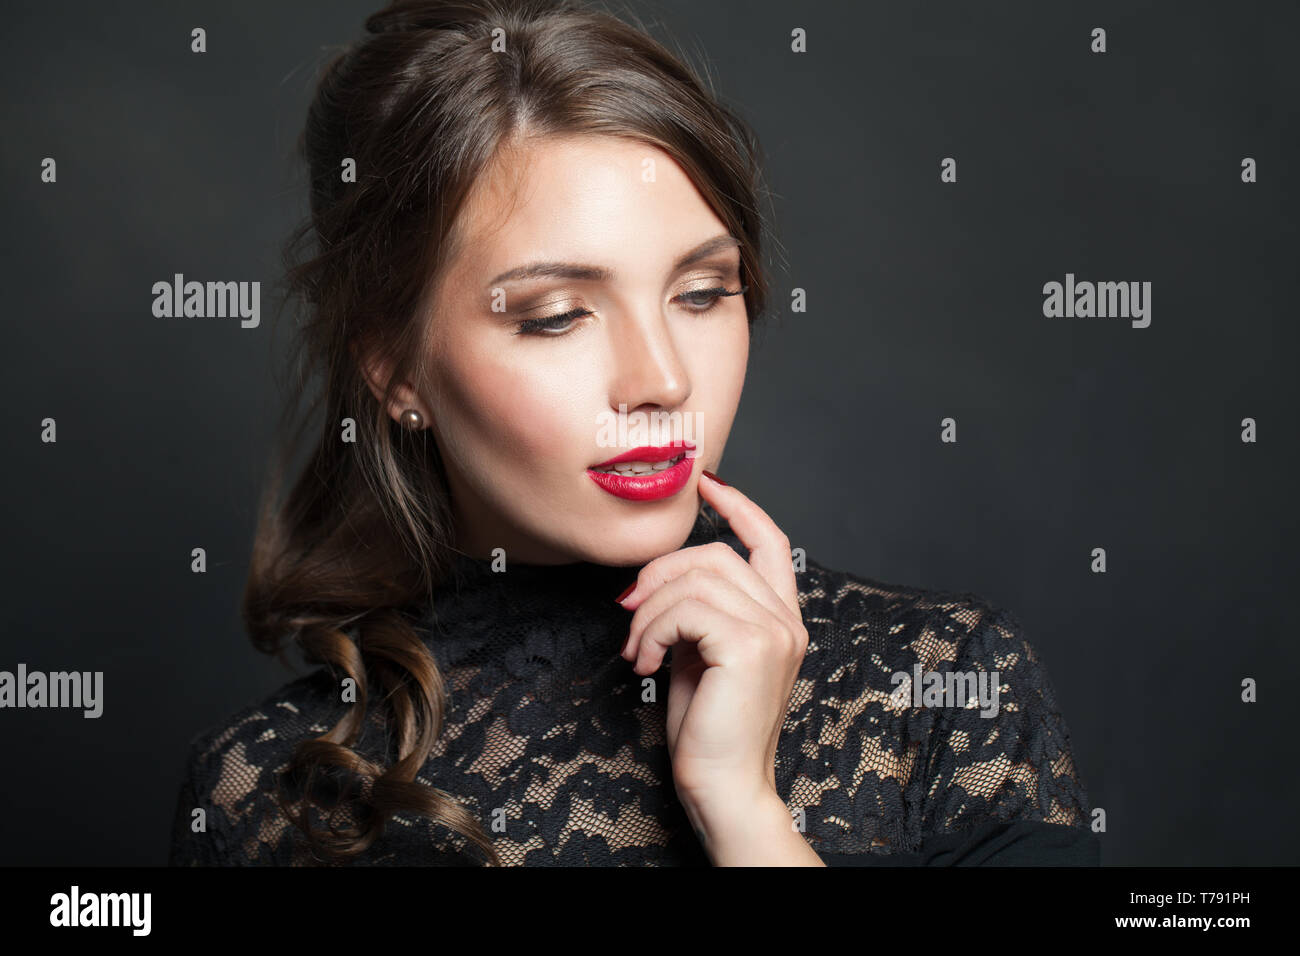 Portrait of beautiful woman with red lips makeup hair on dark background Stock Photo